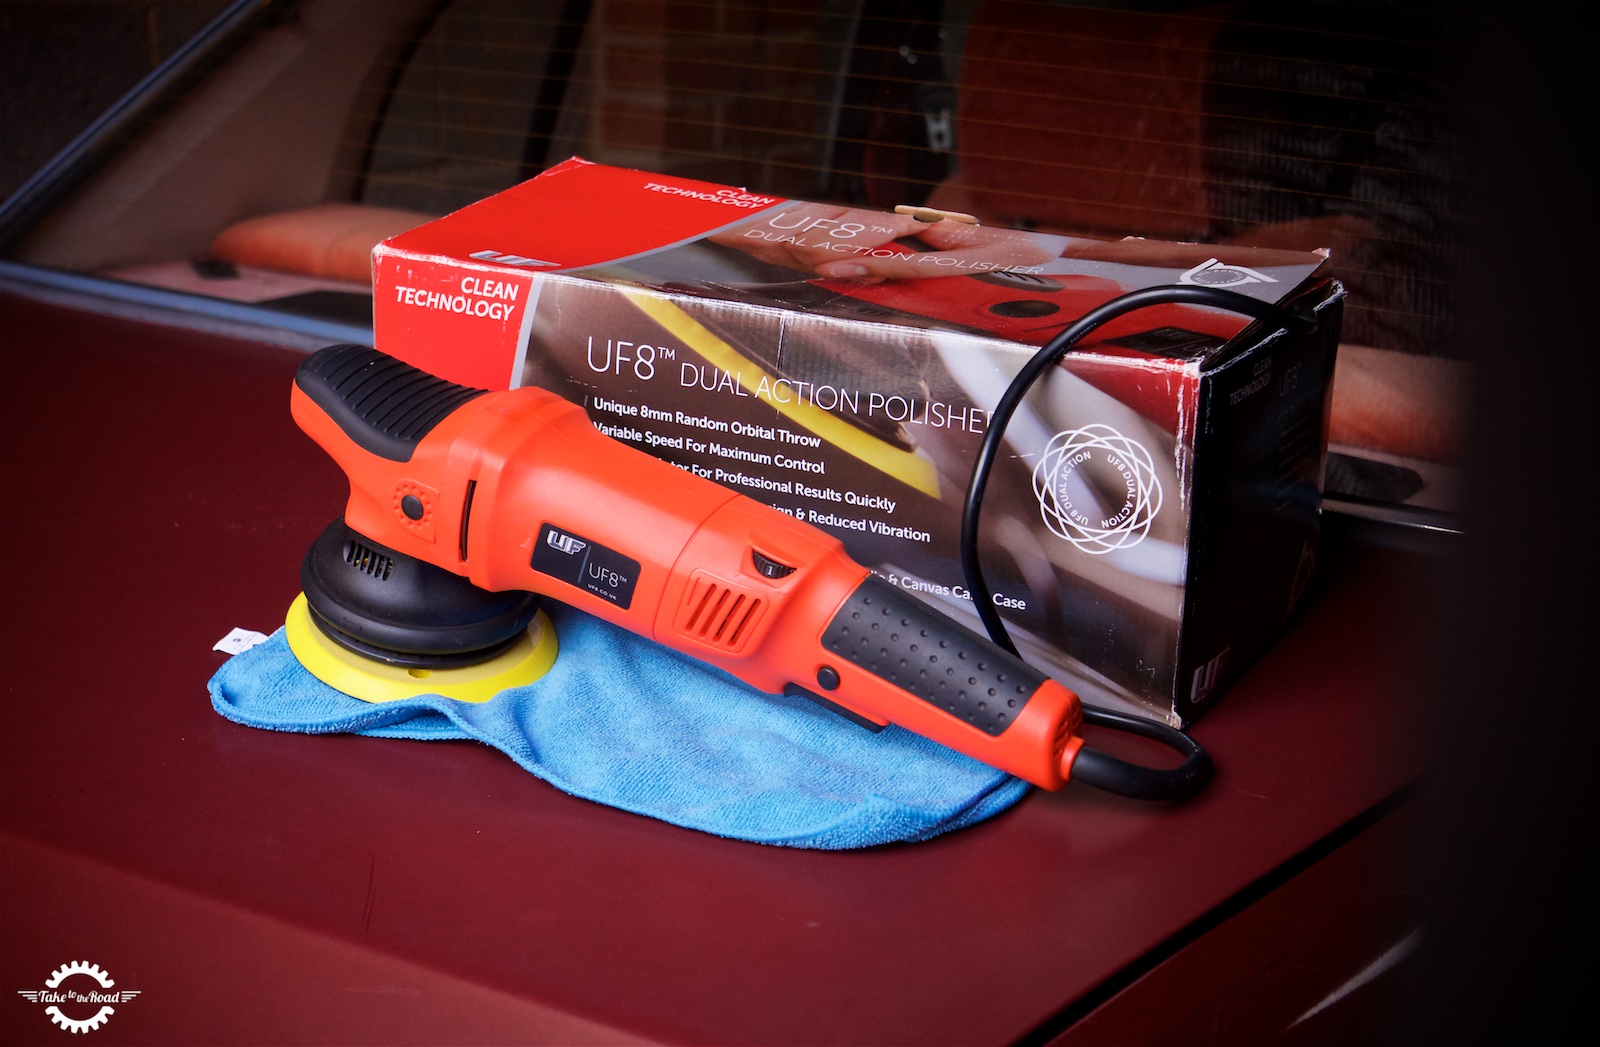 Take to the Road UF8 Polisher Review coming soon